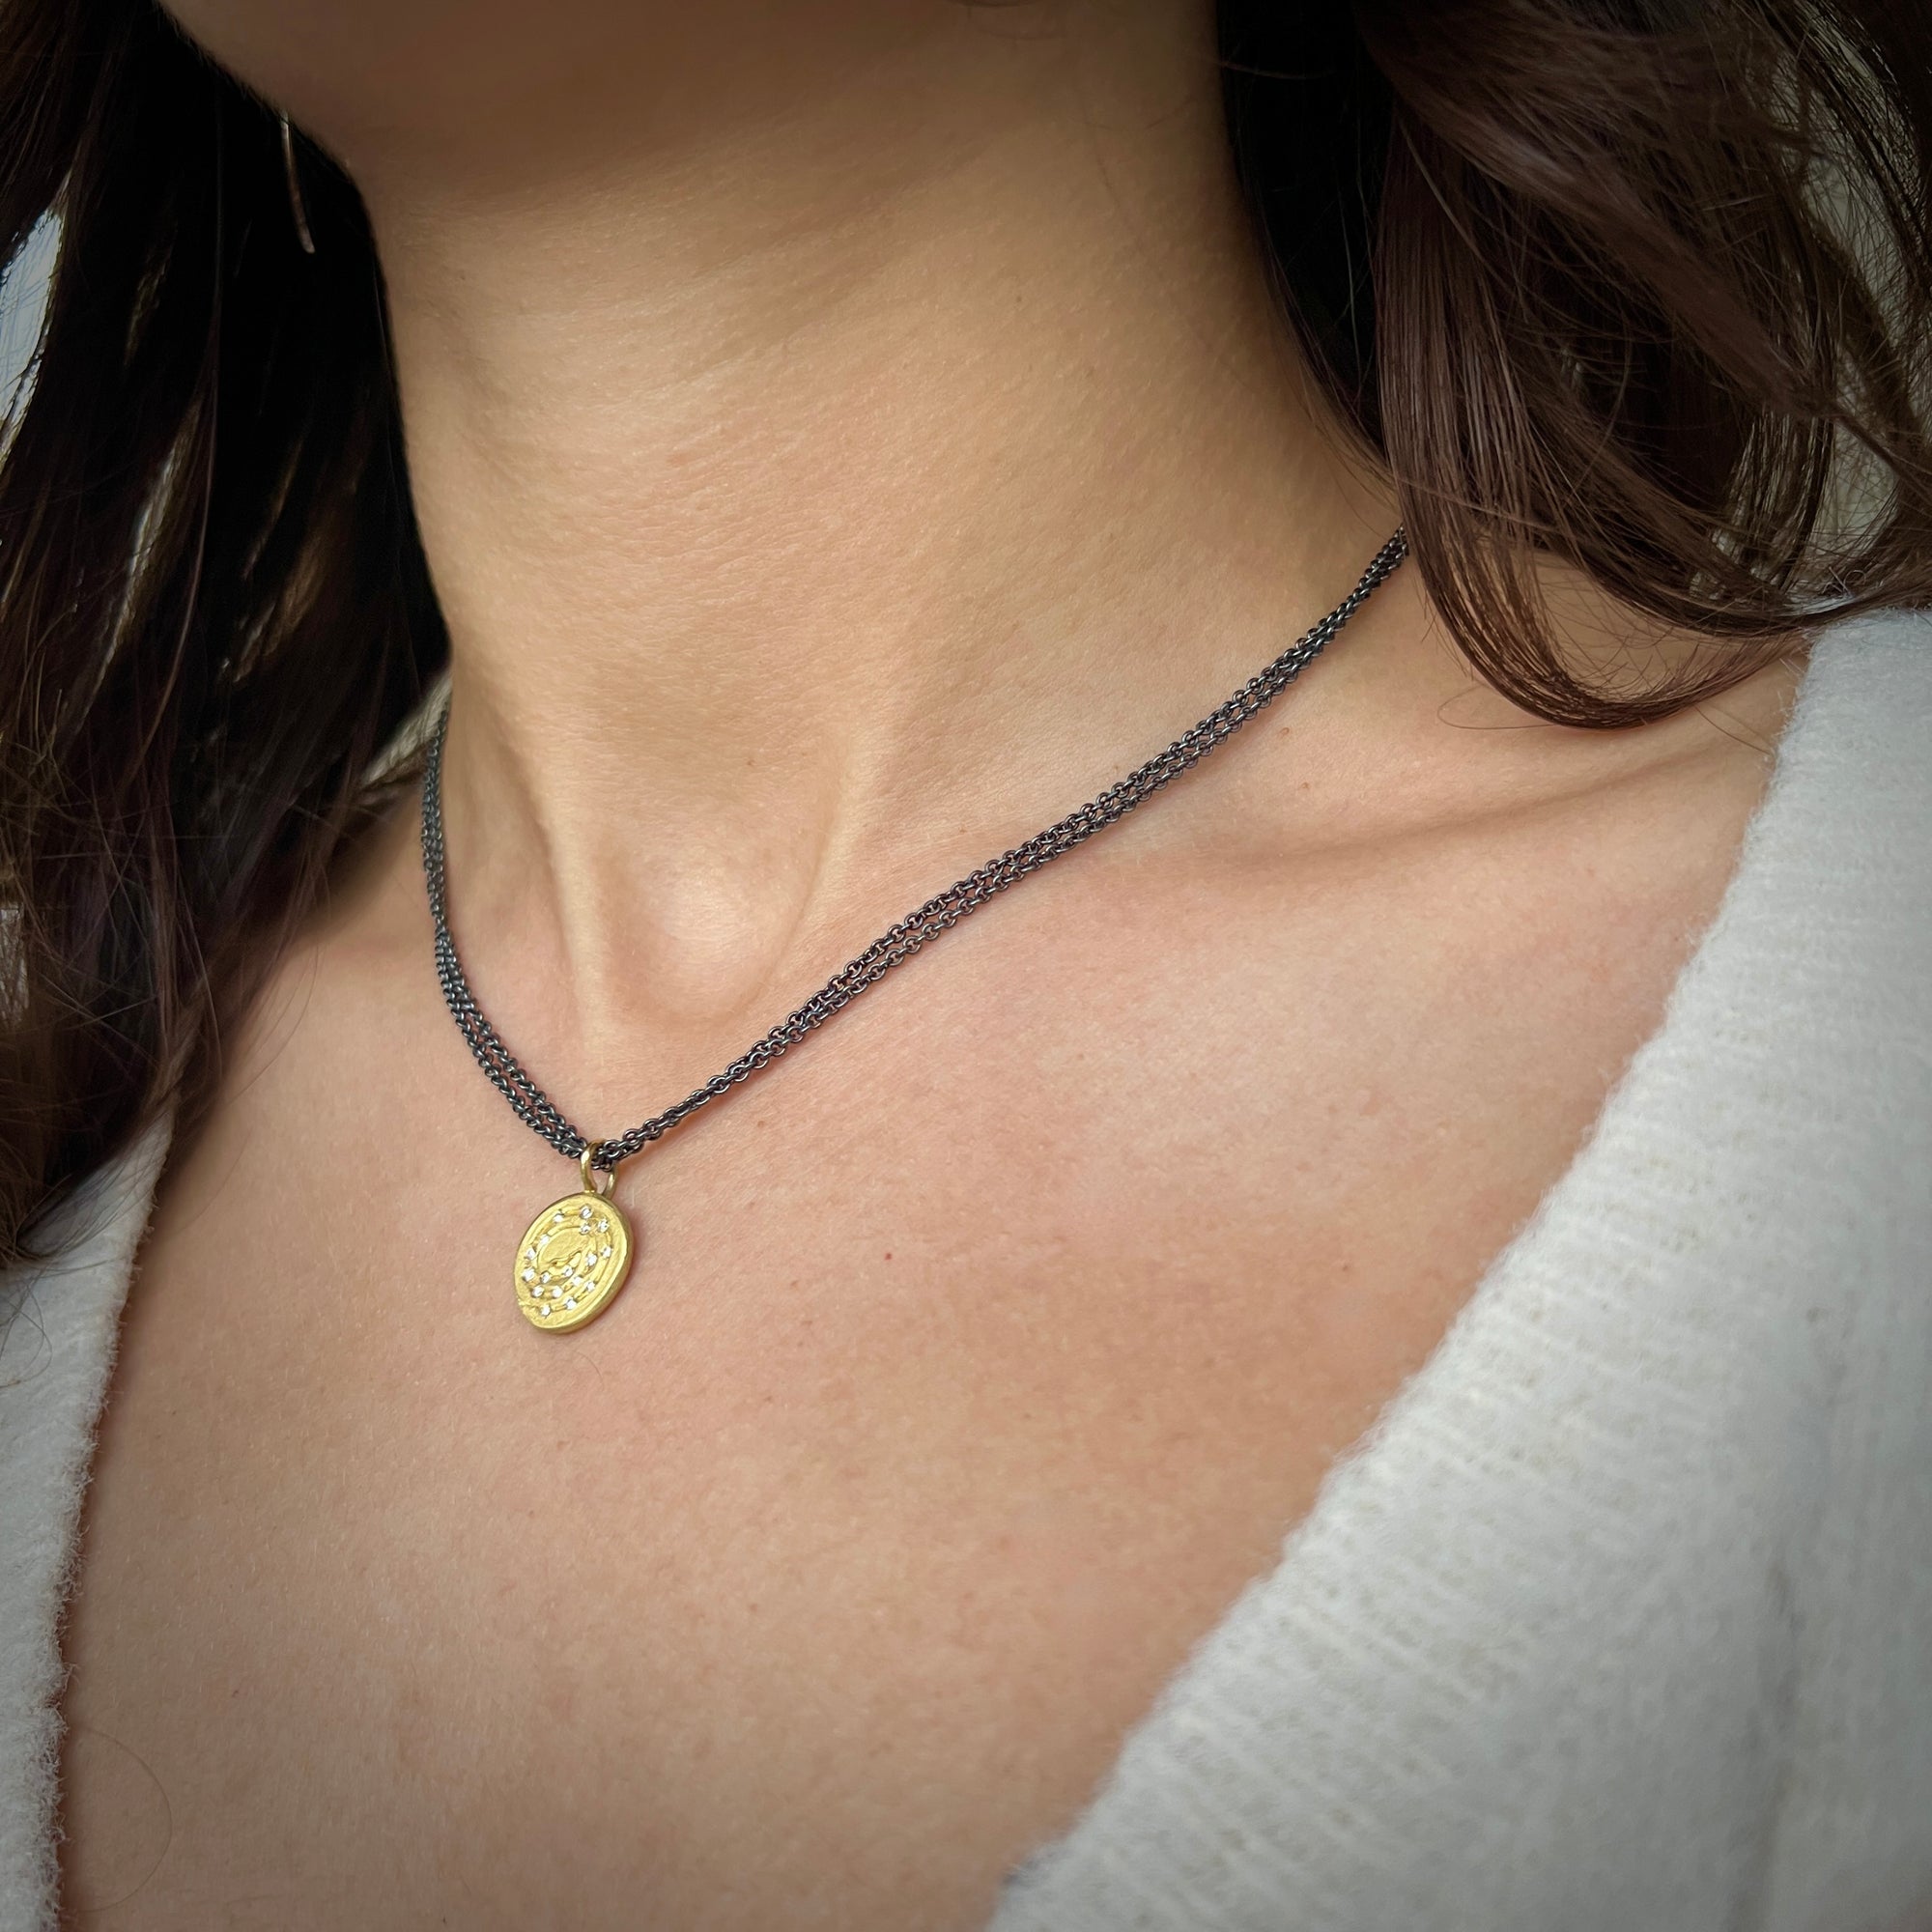 Spiral, coin-like pendant in 18K yellow gold with 17 diamonds double oxidized sterling silver chain made by Ayesha Mayadas